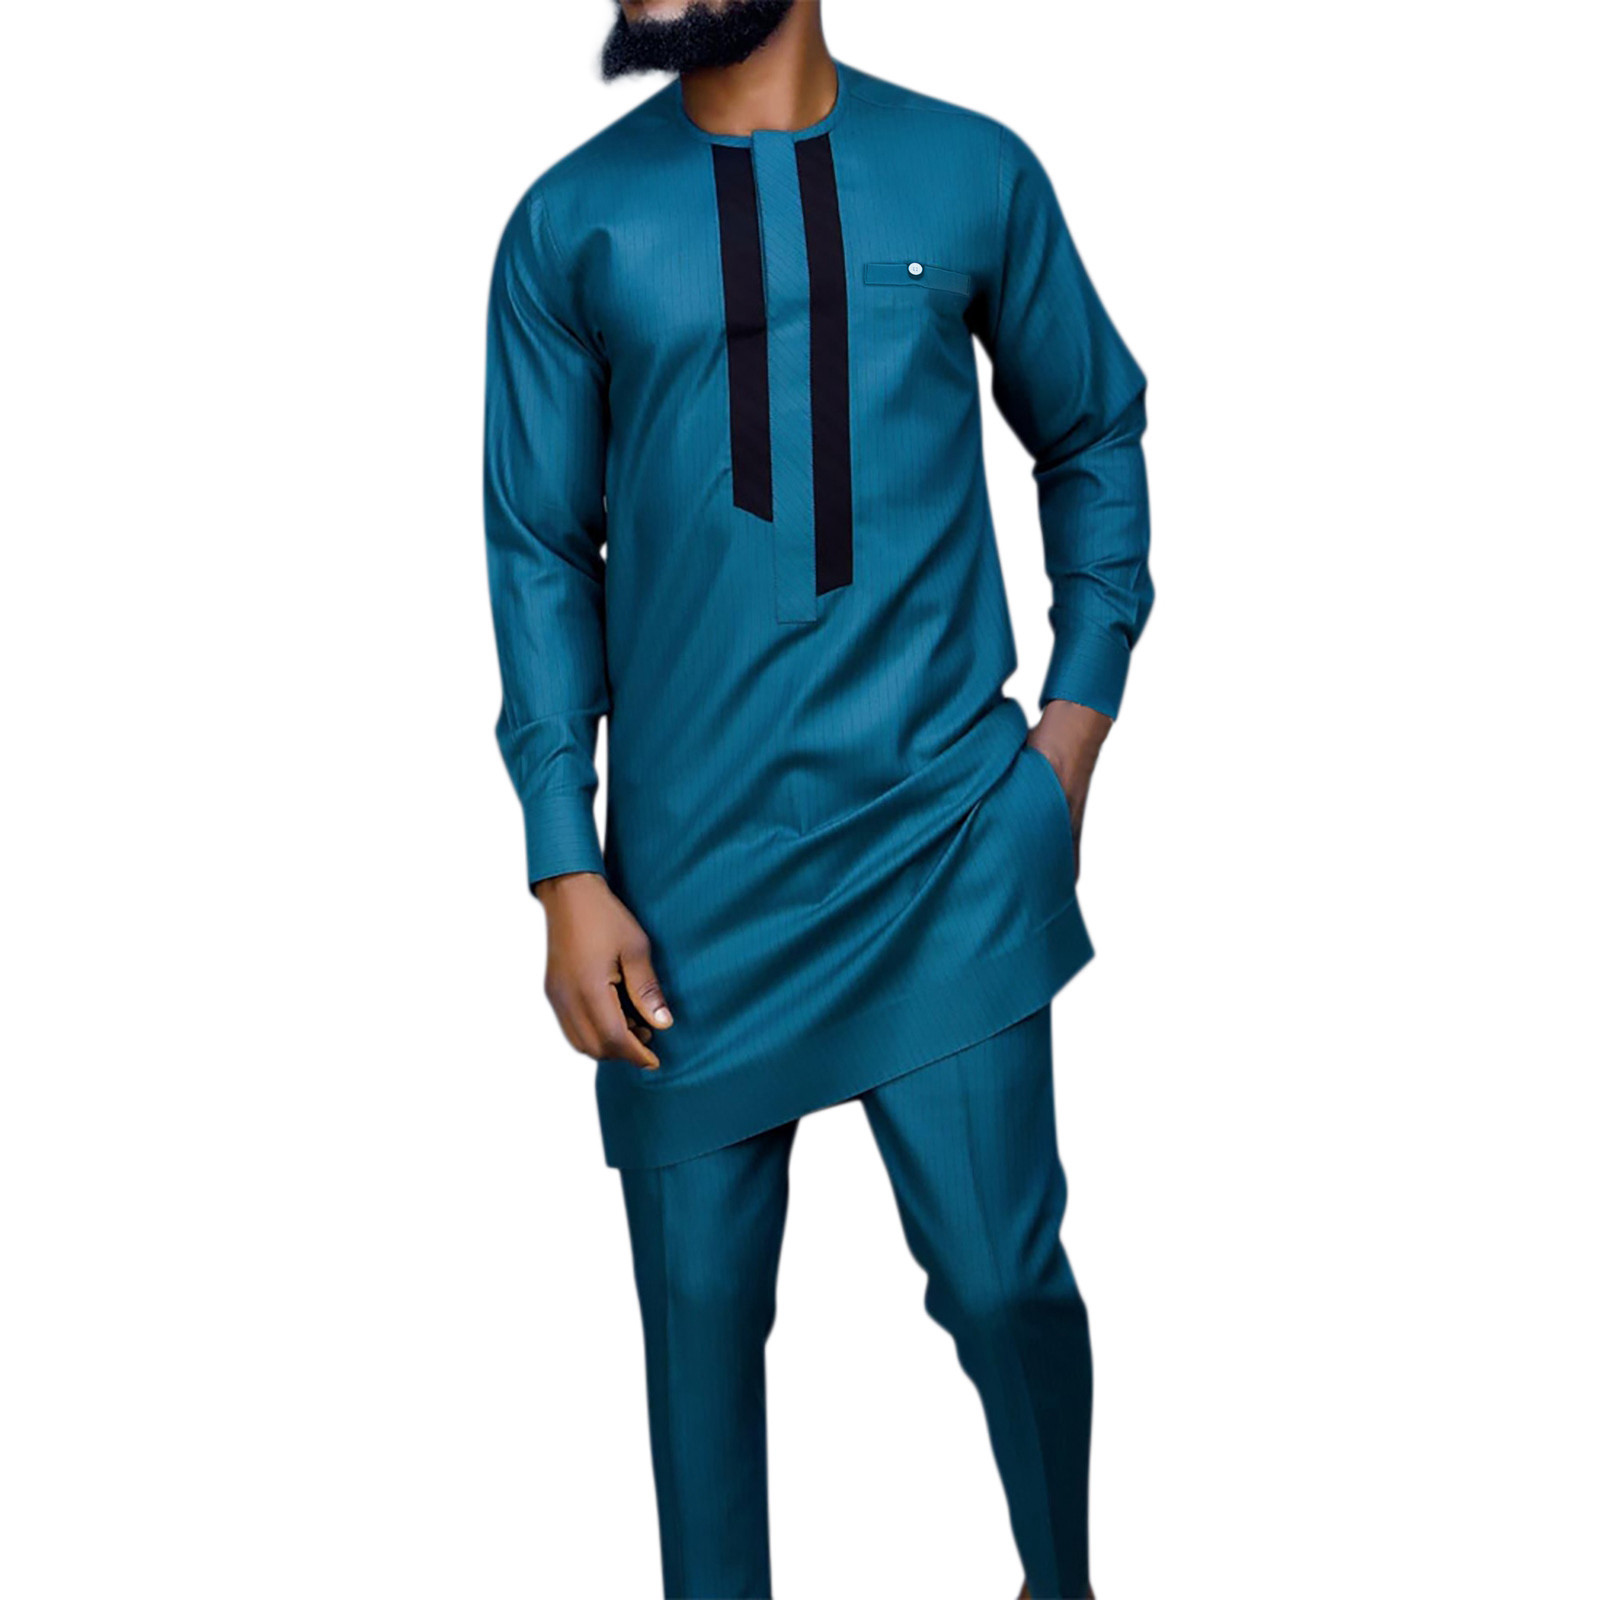 African Men's Formal Clothes Dashiki Shirt and Pant Two Piece Suit ...